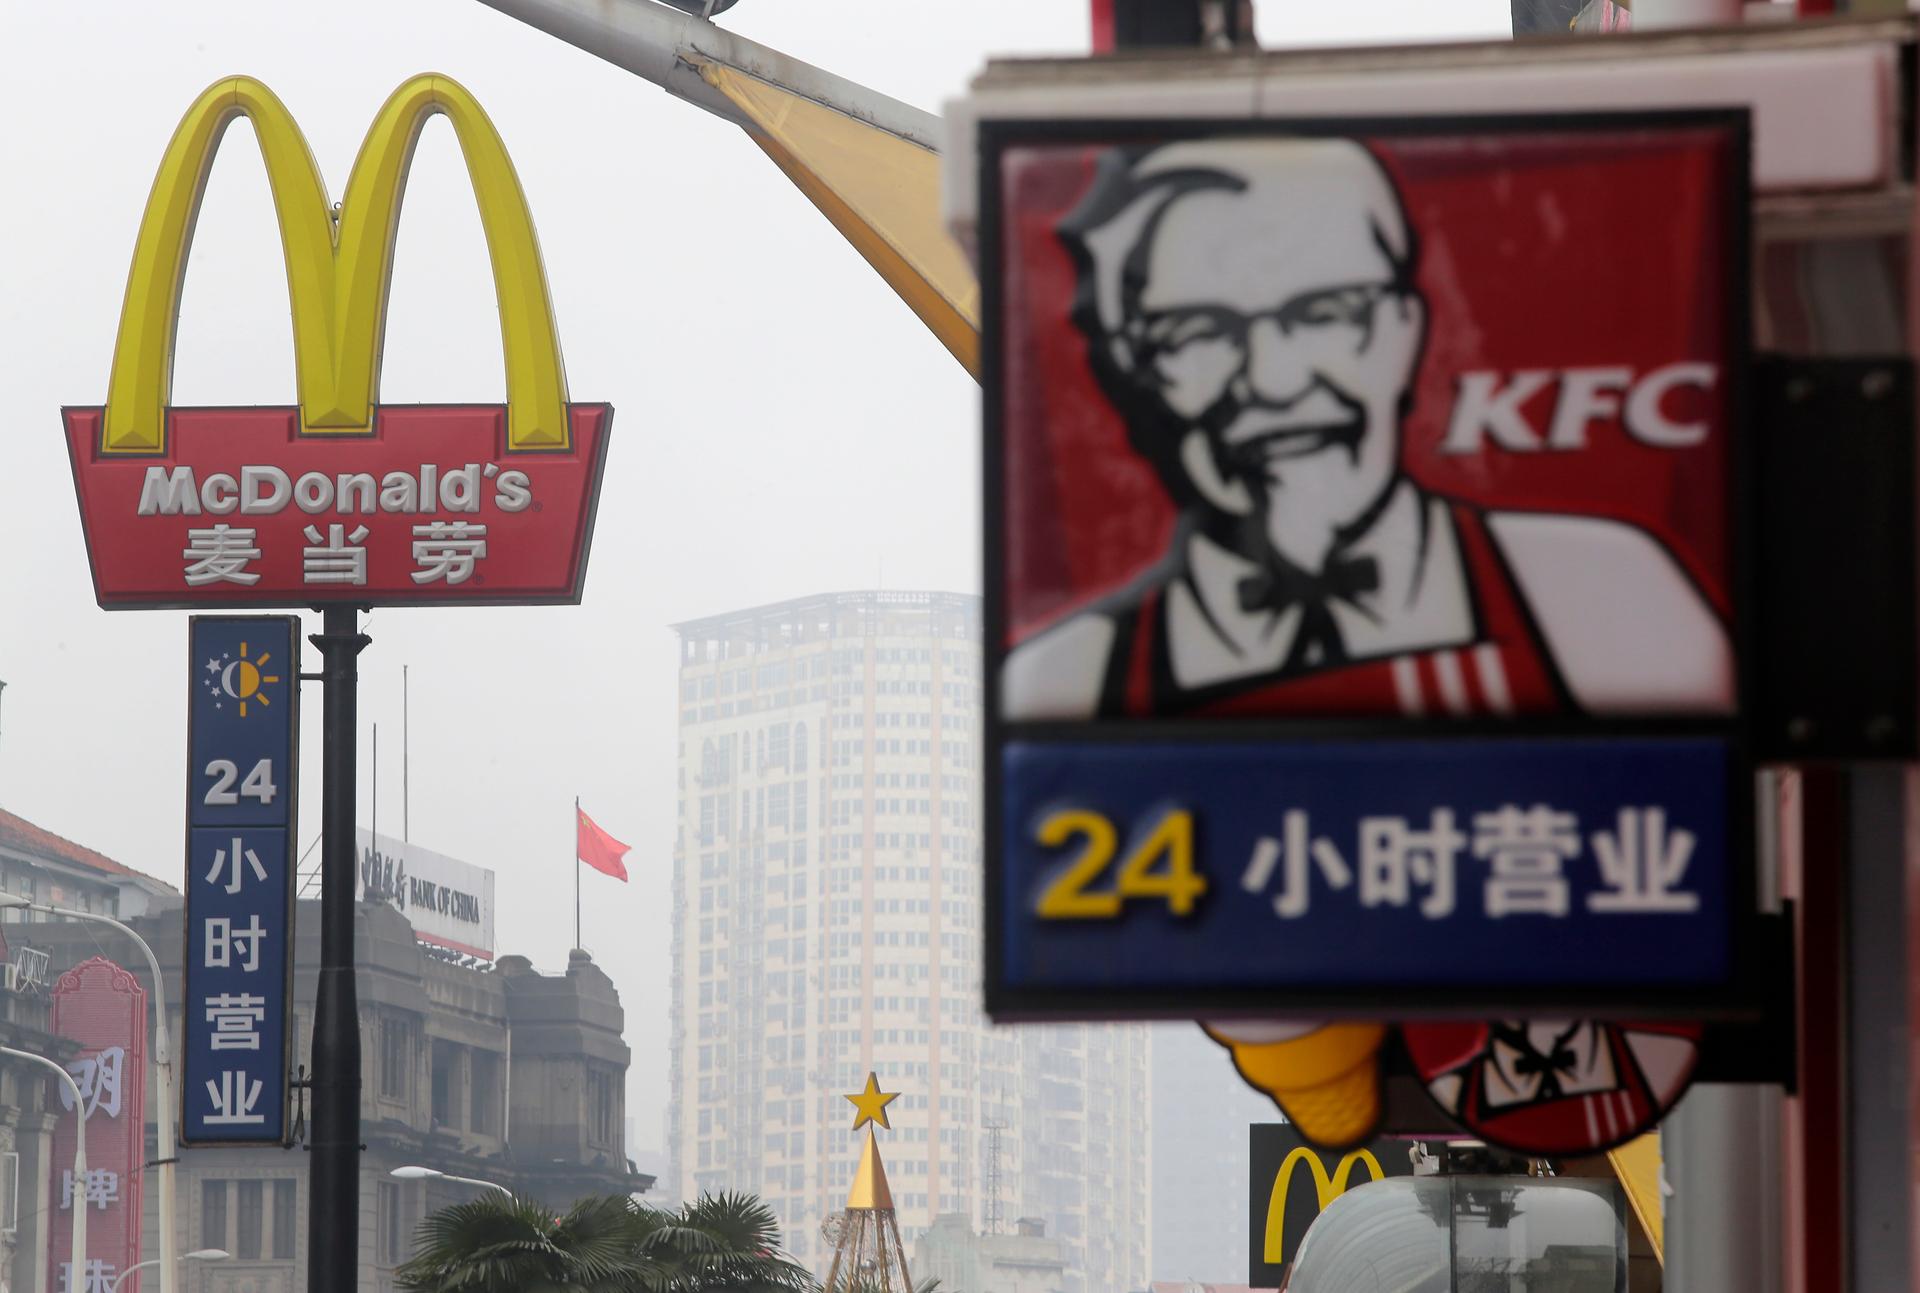 Shanghai Husi Food - a major supplier to many foreign fast-food chains in China, including McDonald's and KFC has been accused of using tainted meat.  